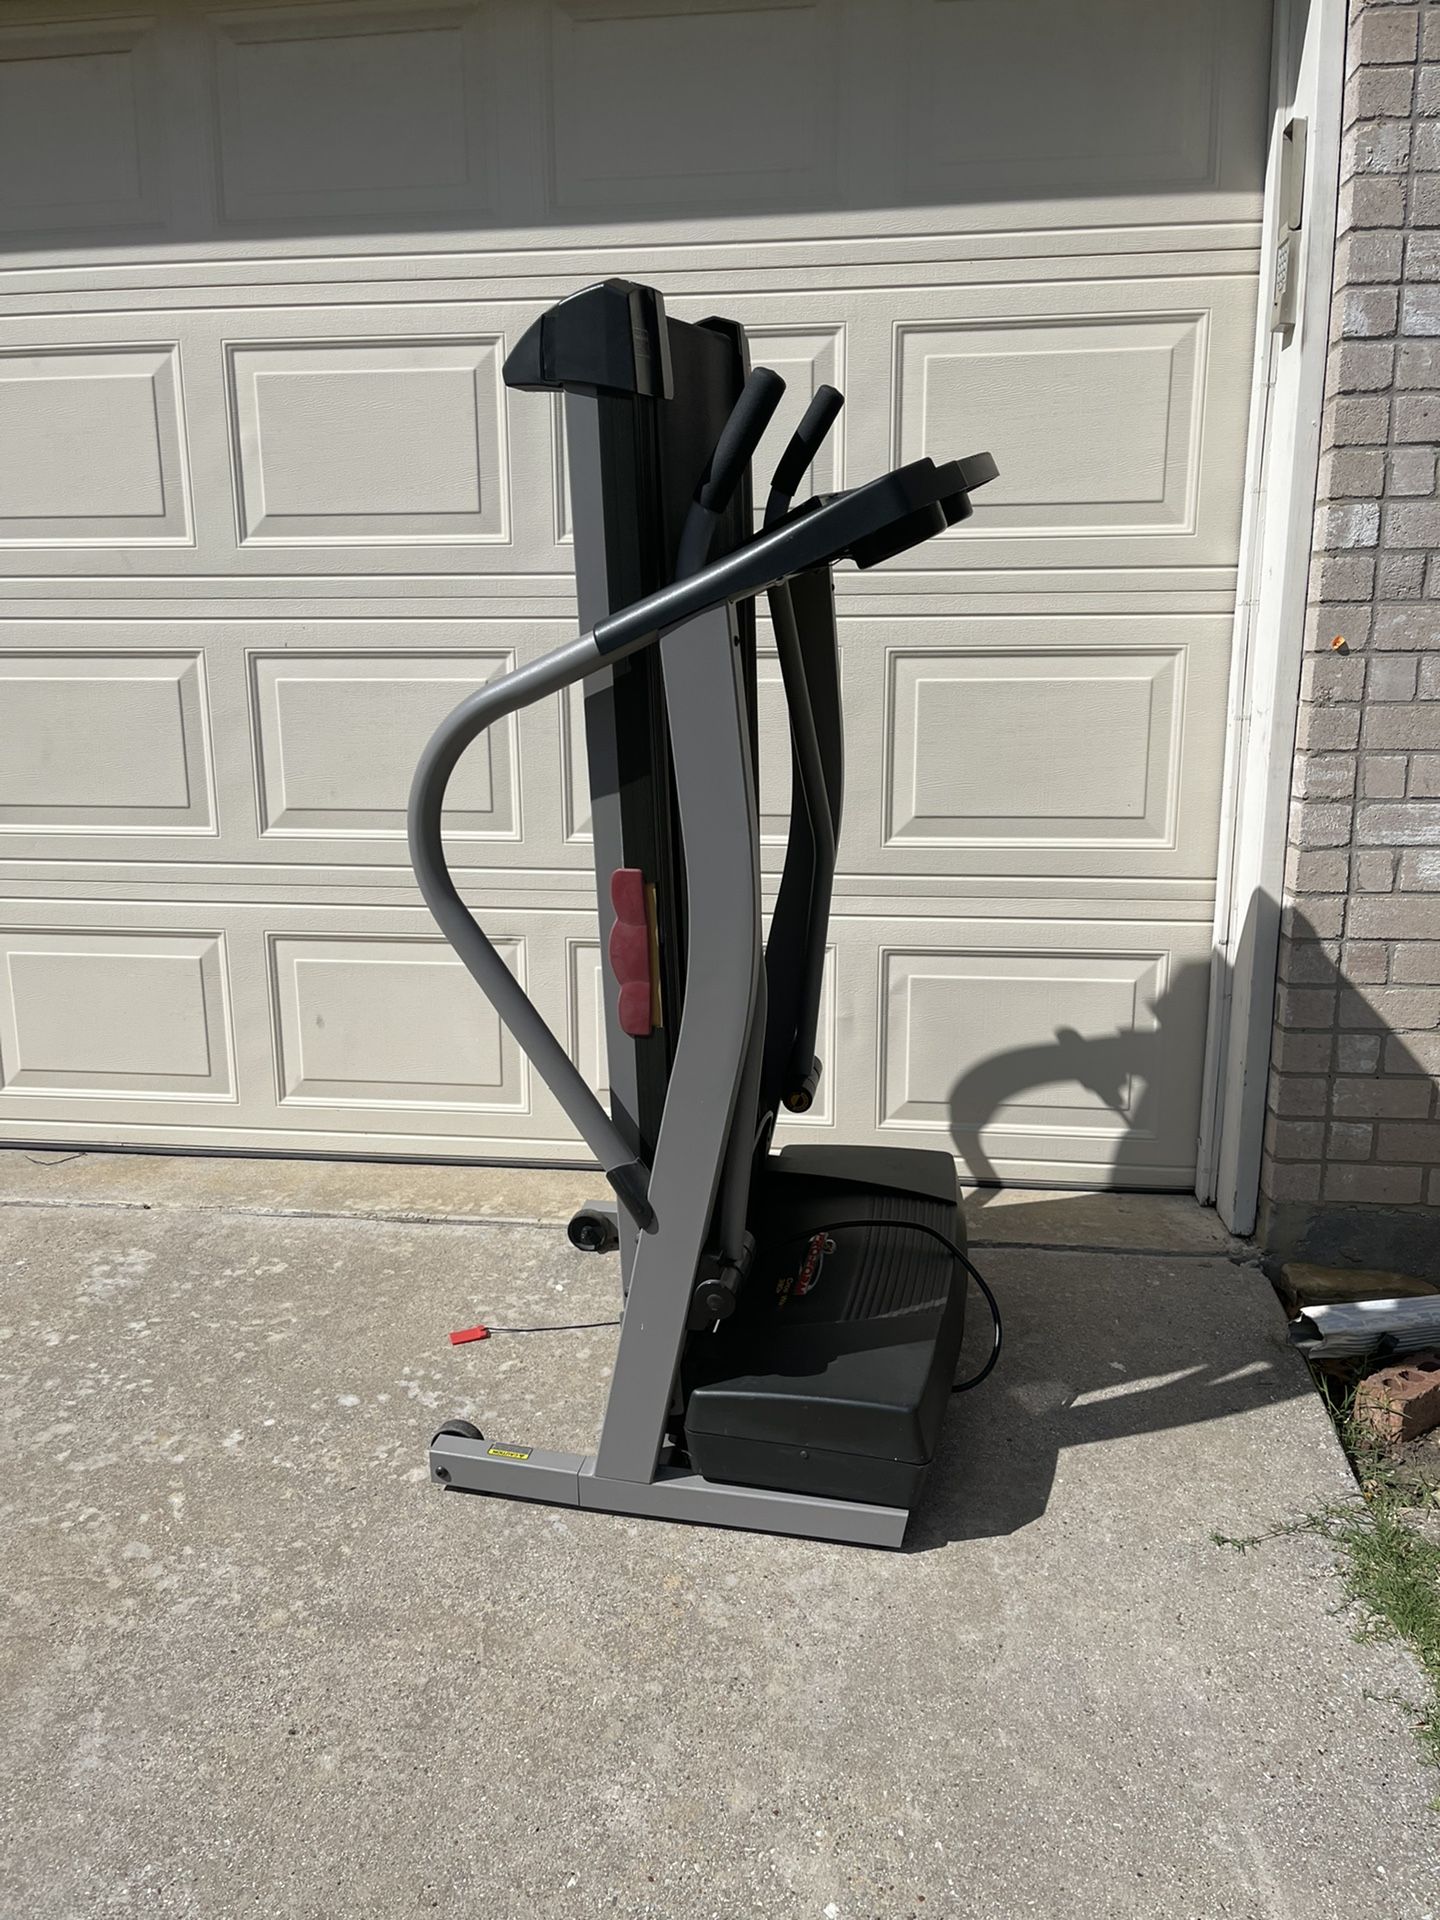 Treadmill Works Excellent Price Firm 